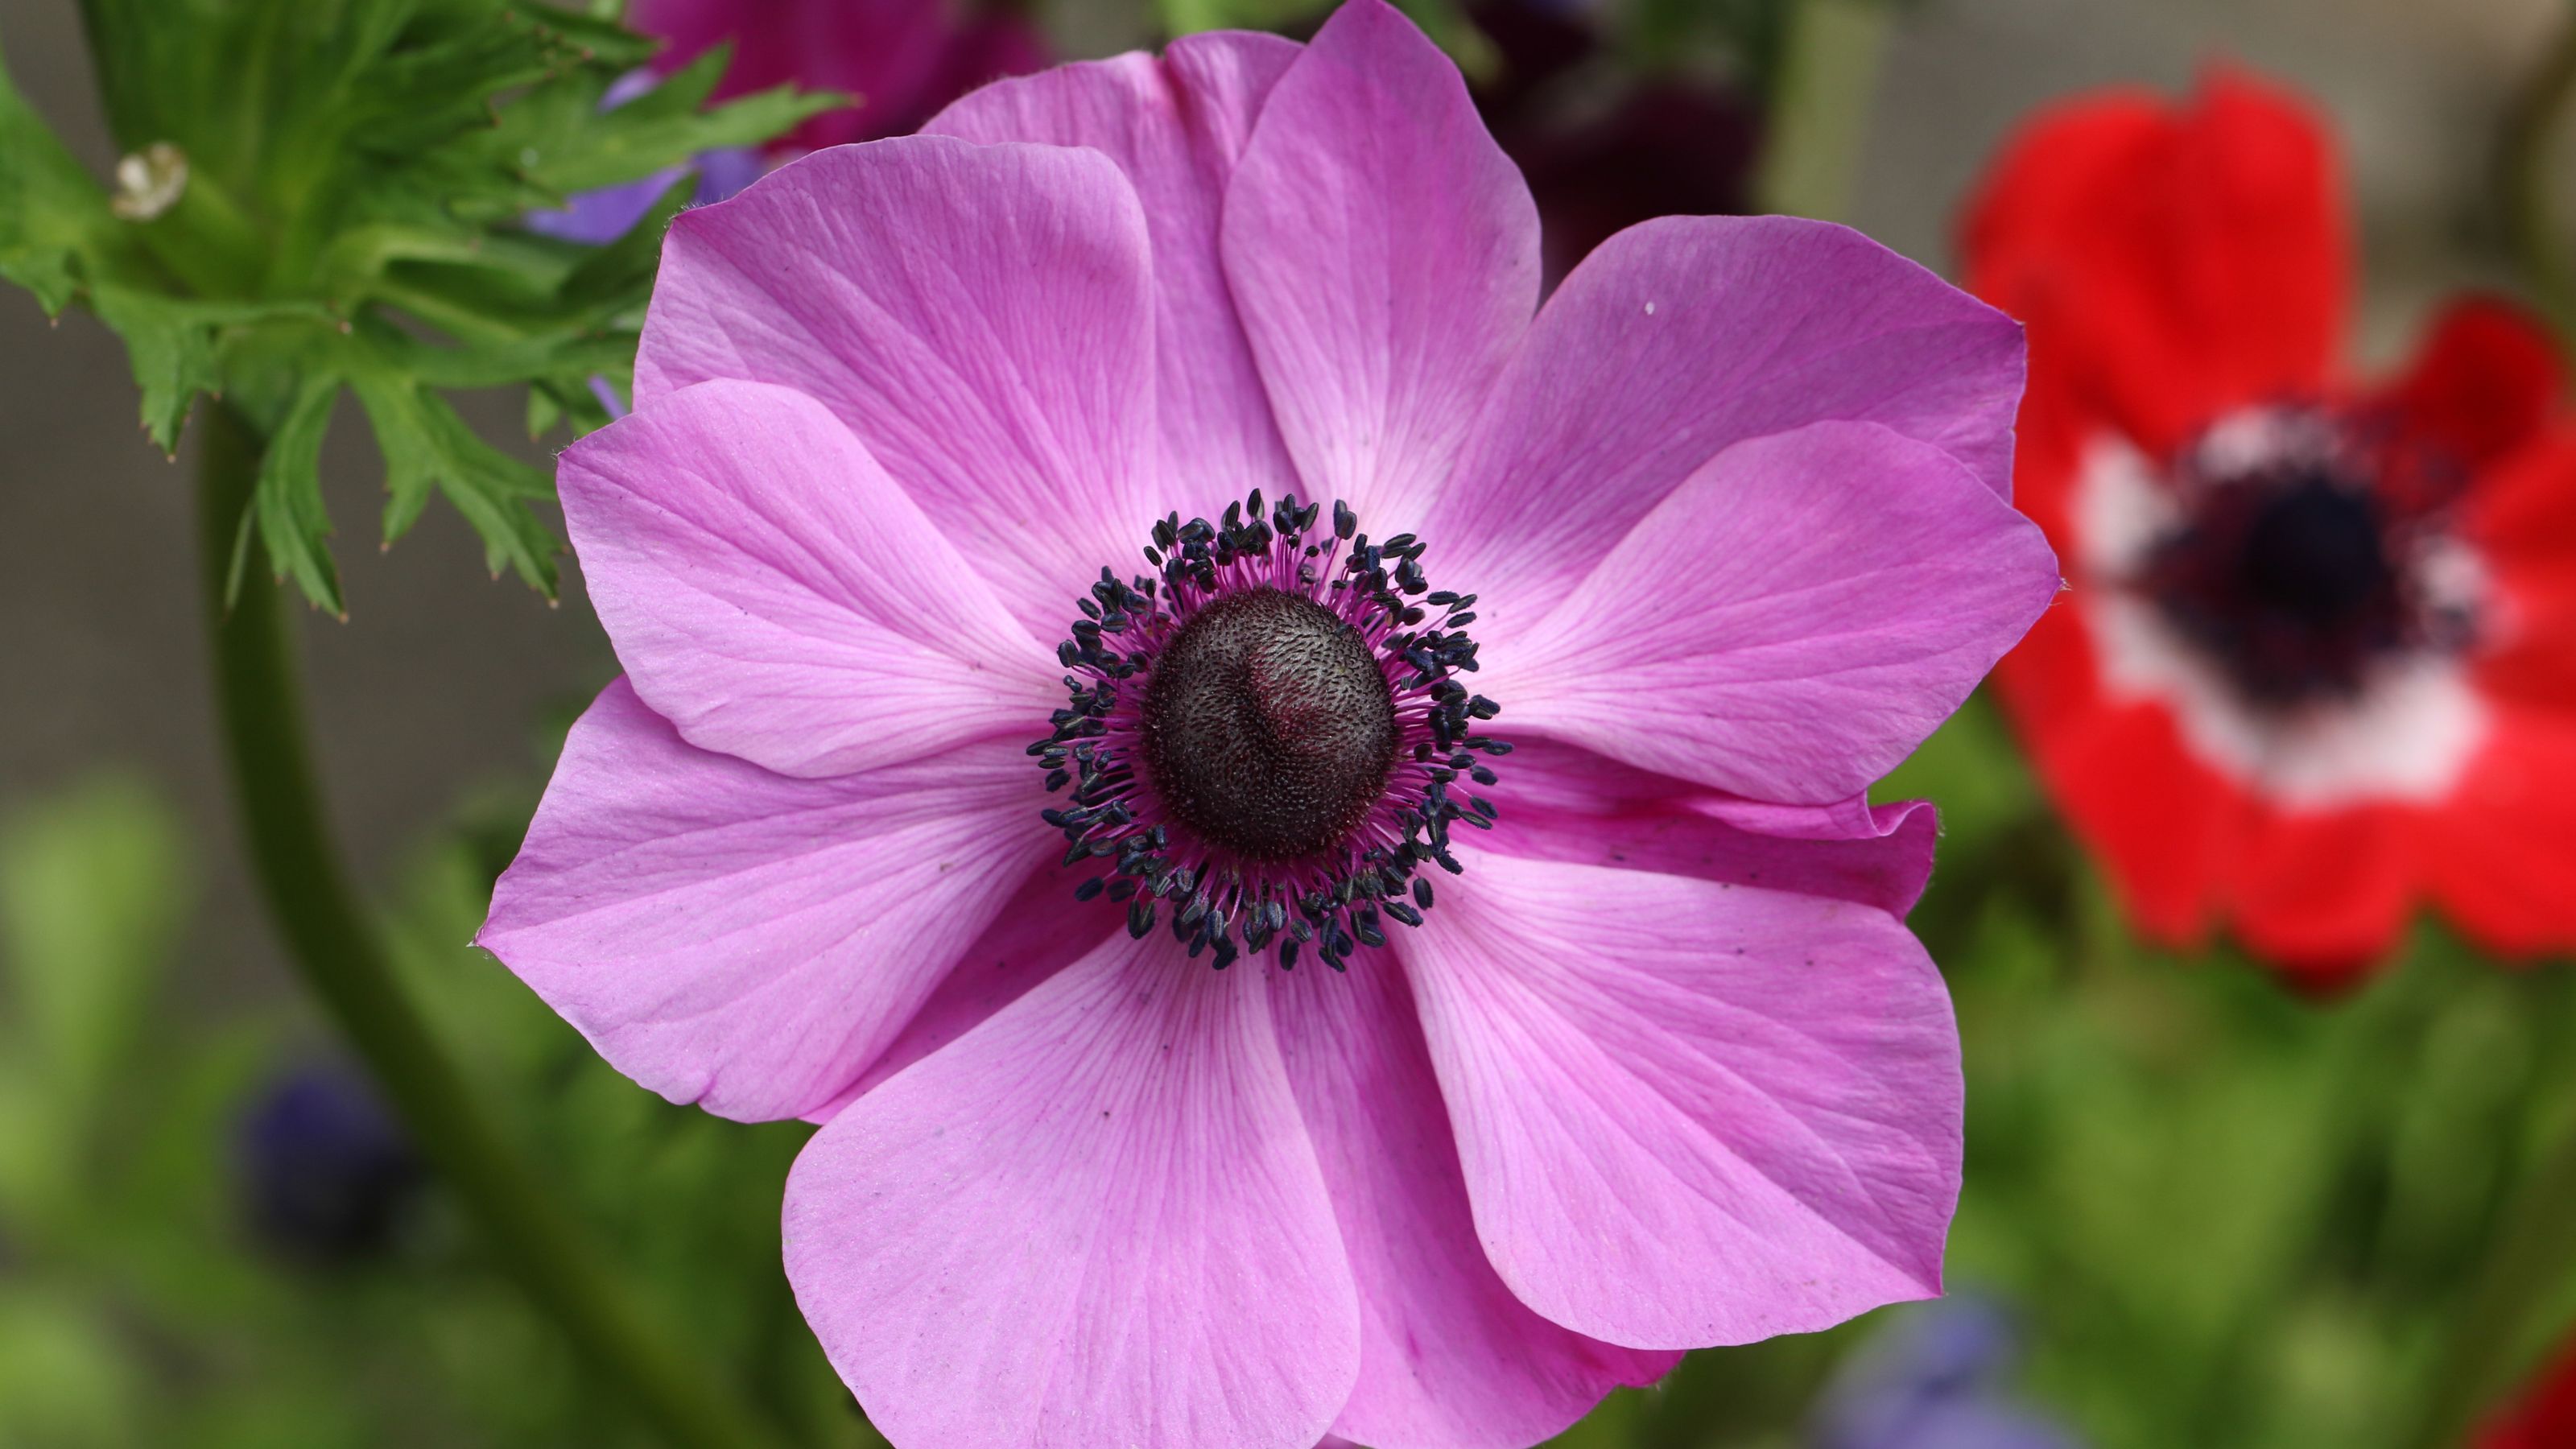 When to plant anemone bulbs for beautiful blooms | Ideal Home